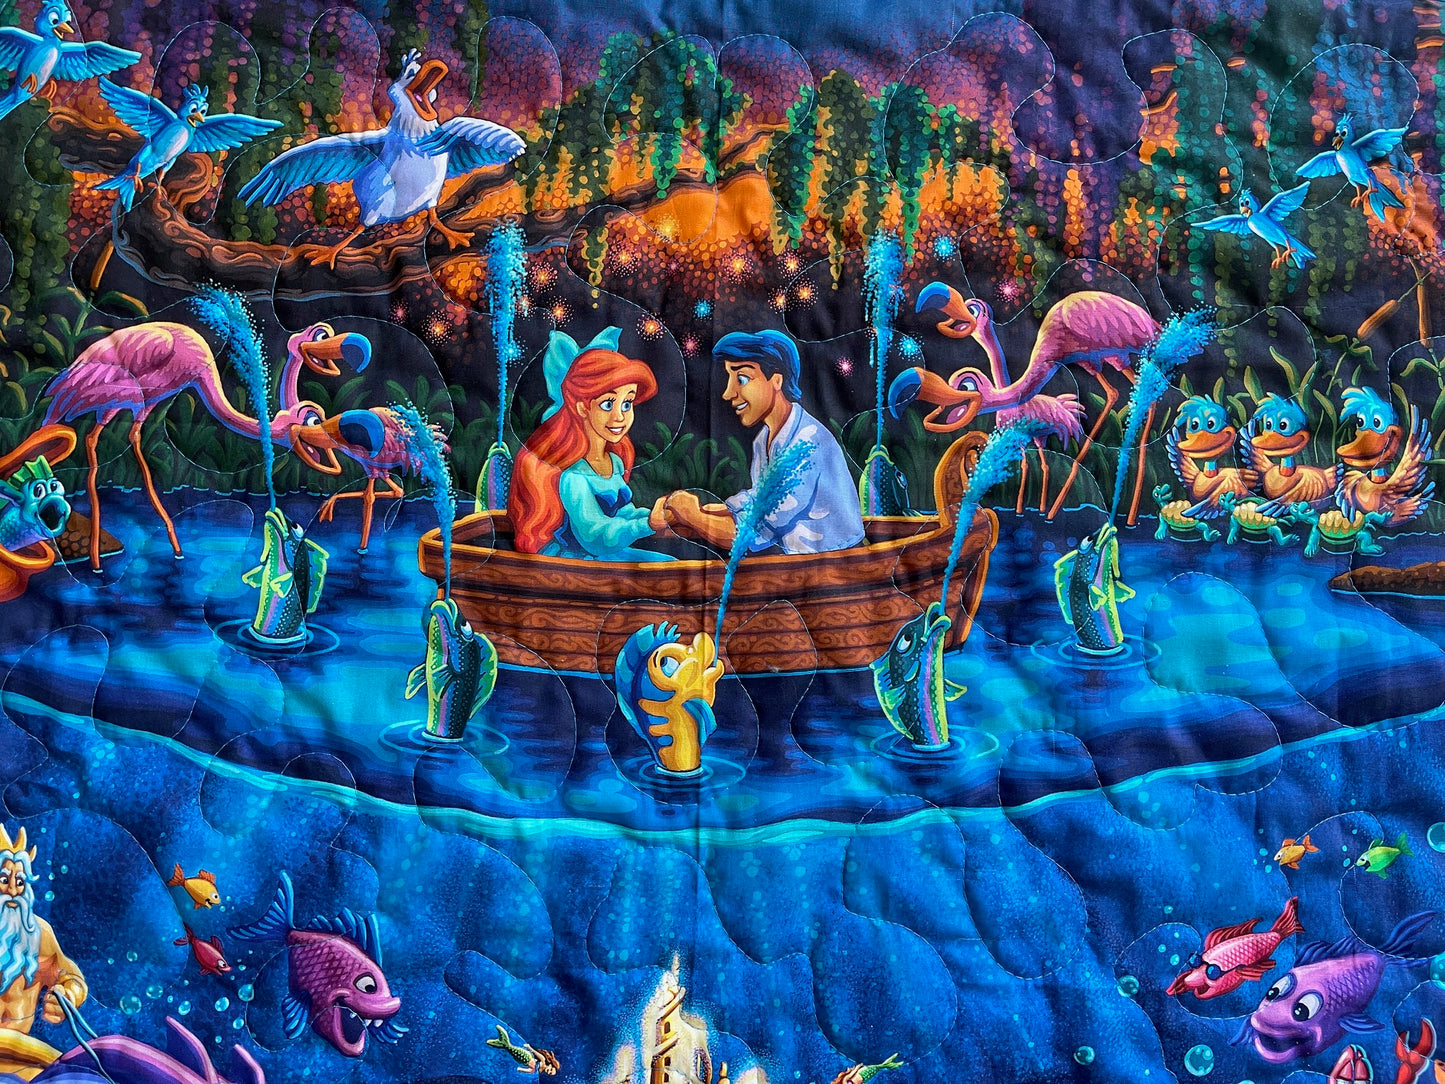 LITTLE MERMAID Inspired Beautifully Digital Photographed Fabric Quilted Blanket 36"x44"